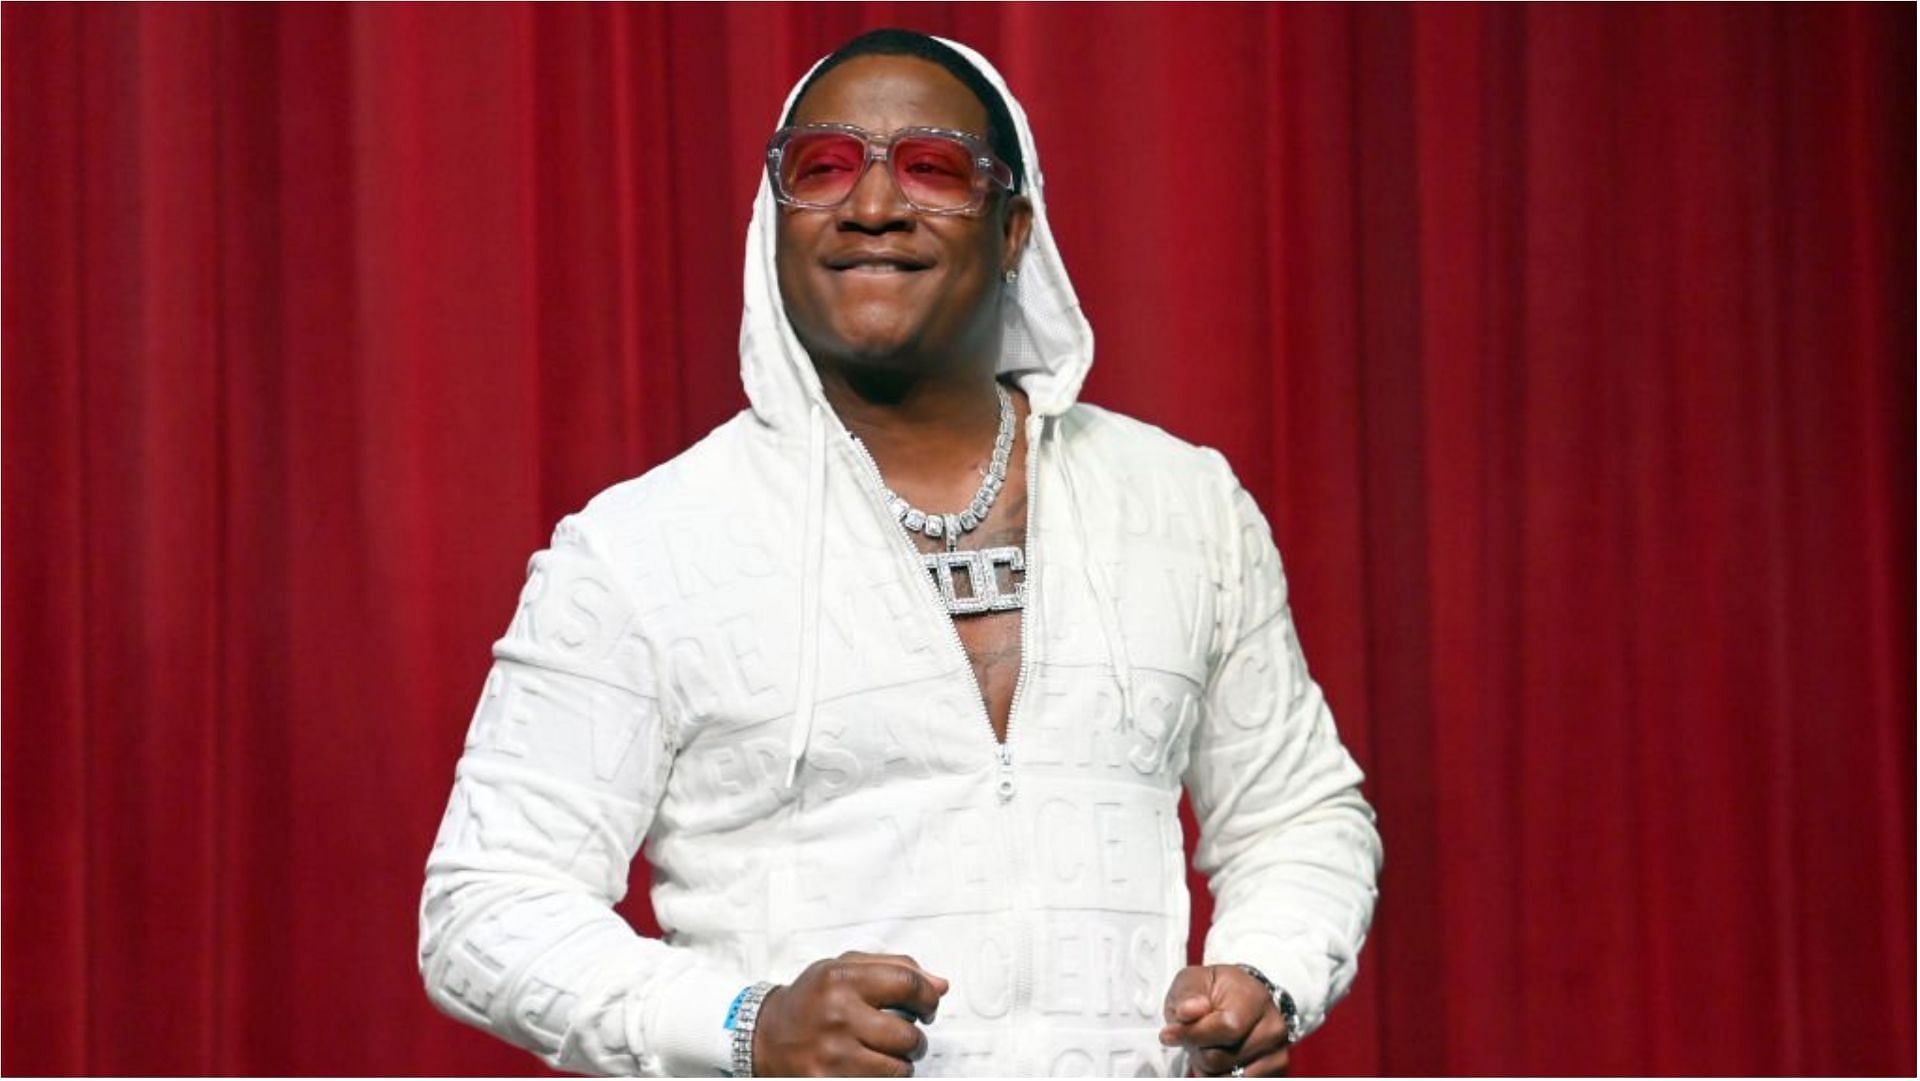 Yung Joc accidentally sent $1,800 to a wrong person (Image via Paras Griffin/Getty Images)